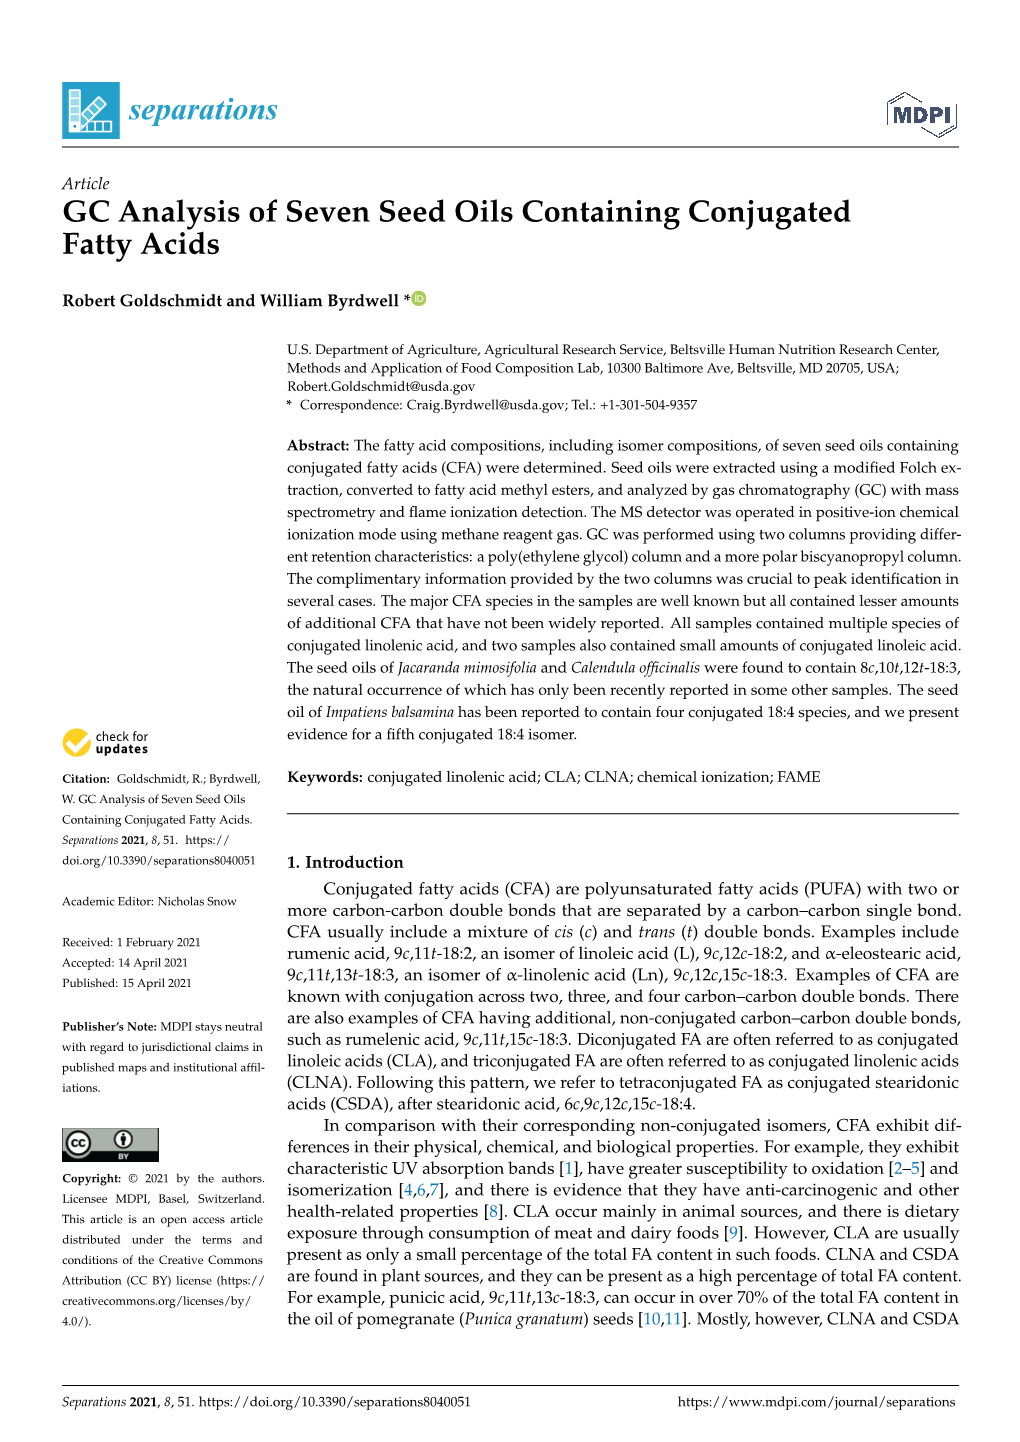 GC Analysis of Seven Seed Oils Containing Conjugated Fatty Acids